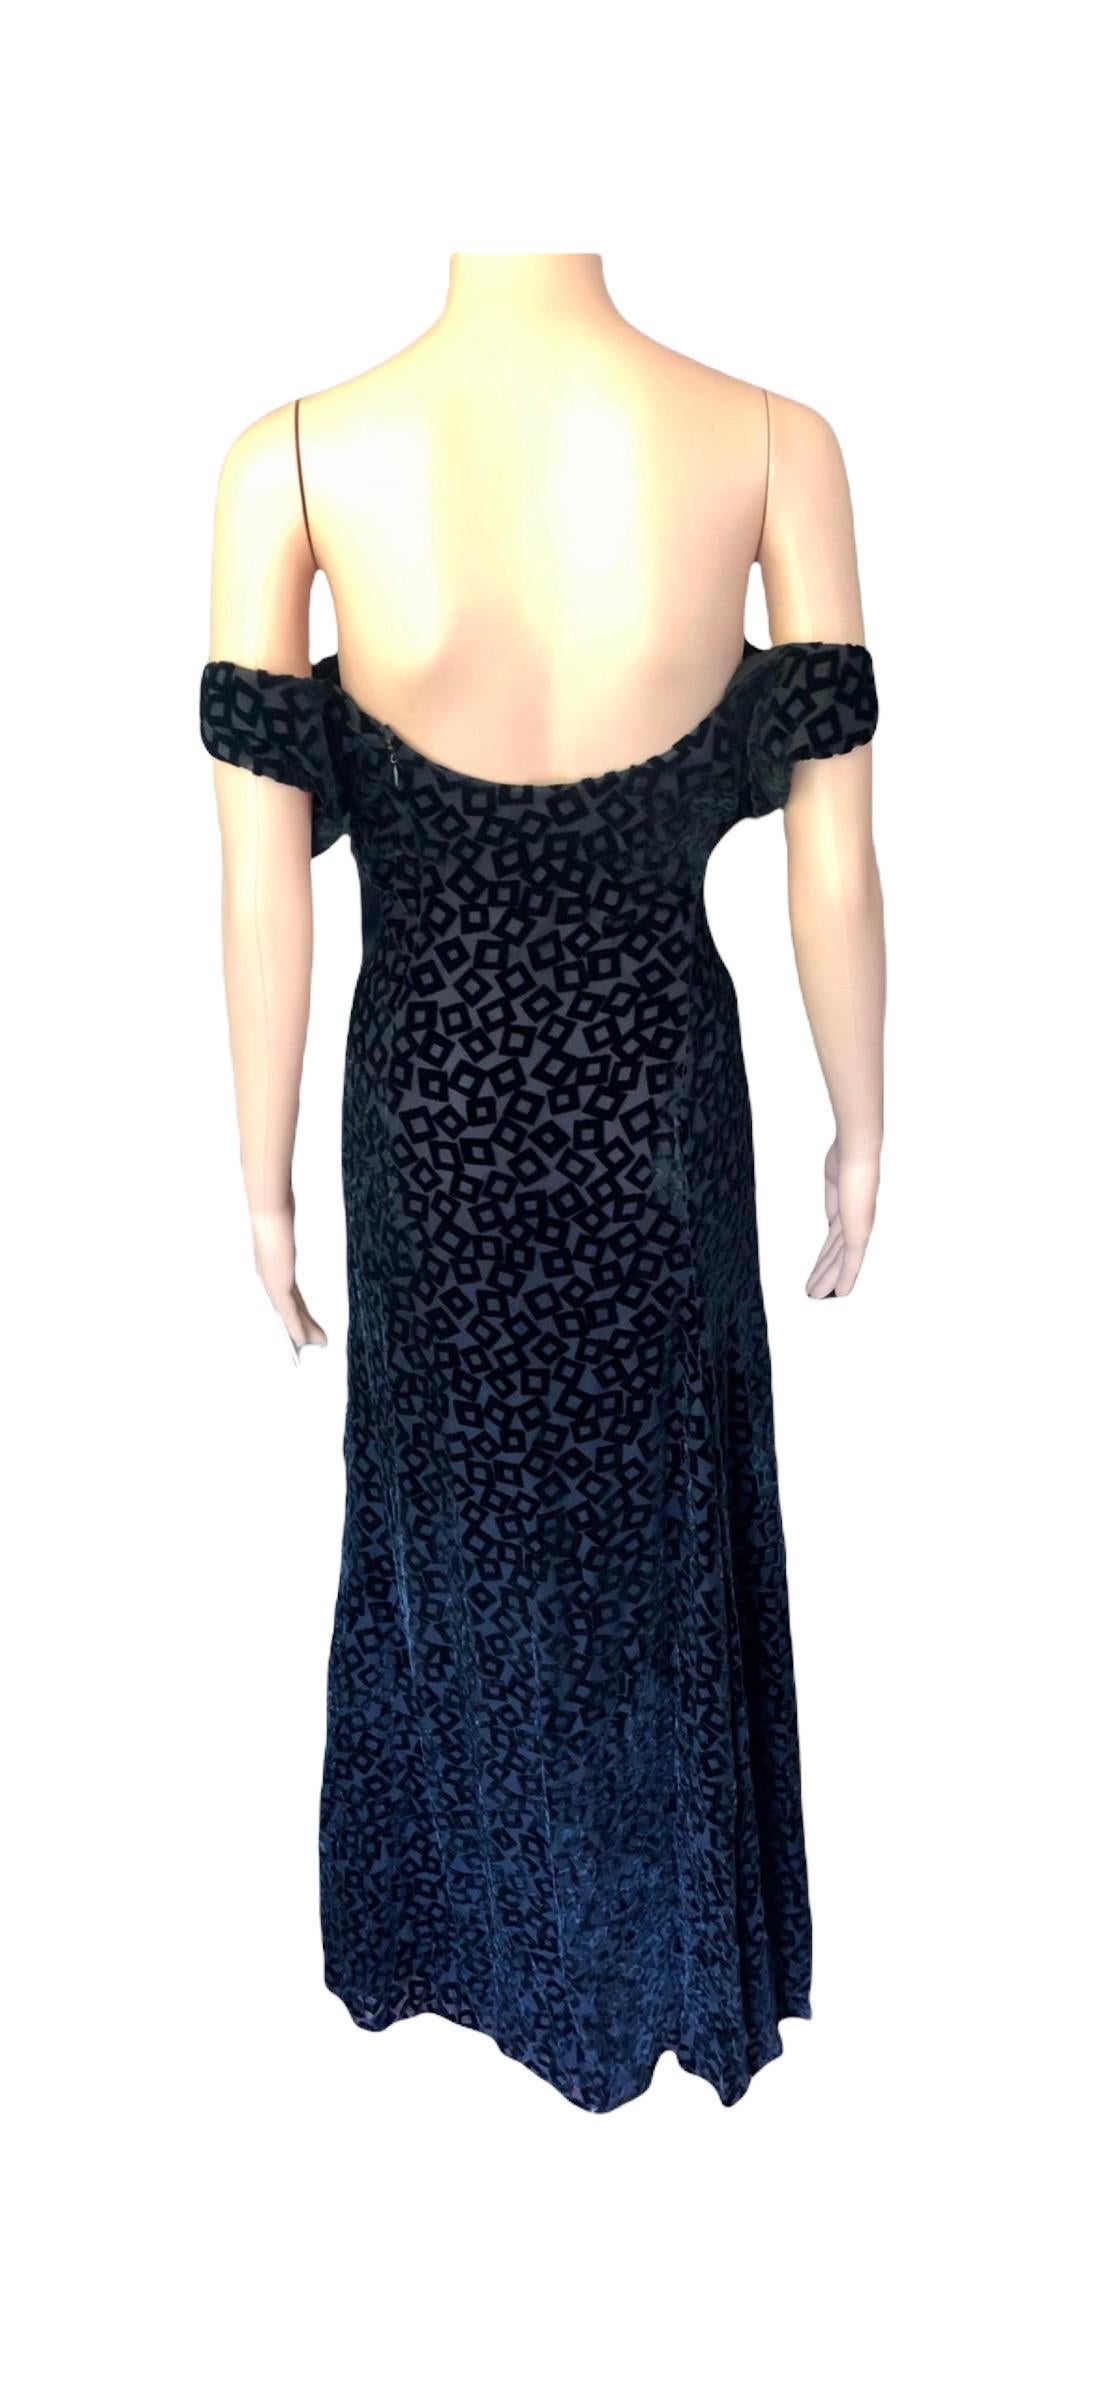 Gianni Versace S/S 1999 Vintage Black Evening Dress Gown For Sale 10